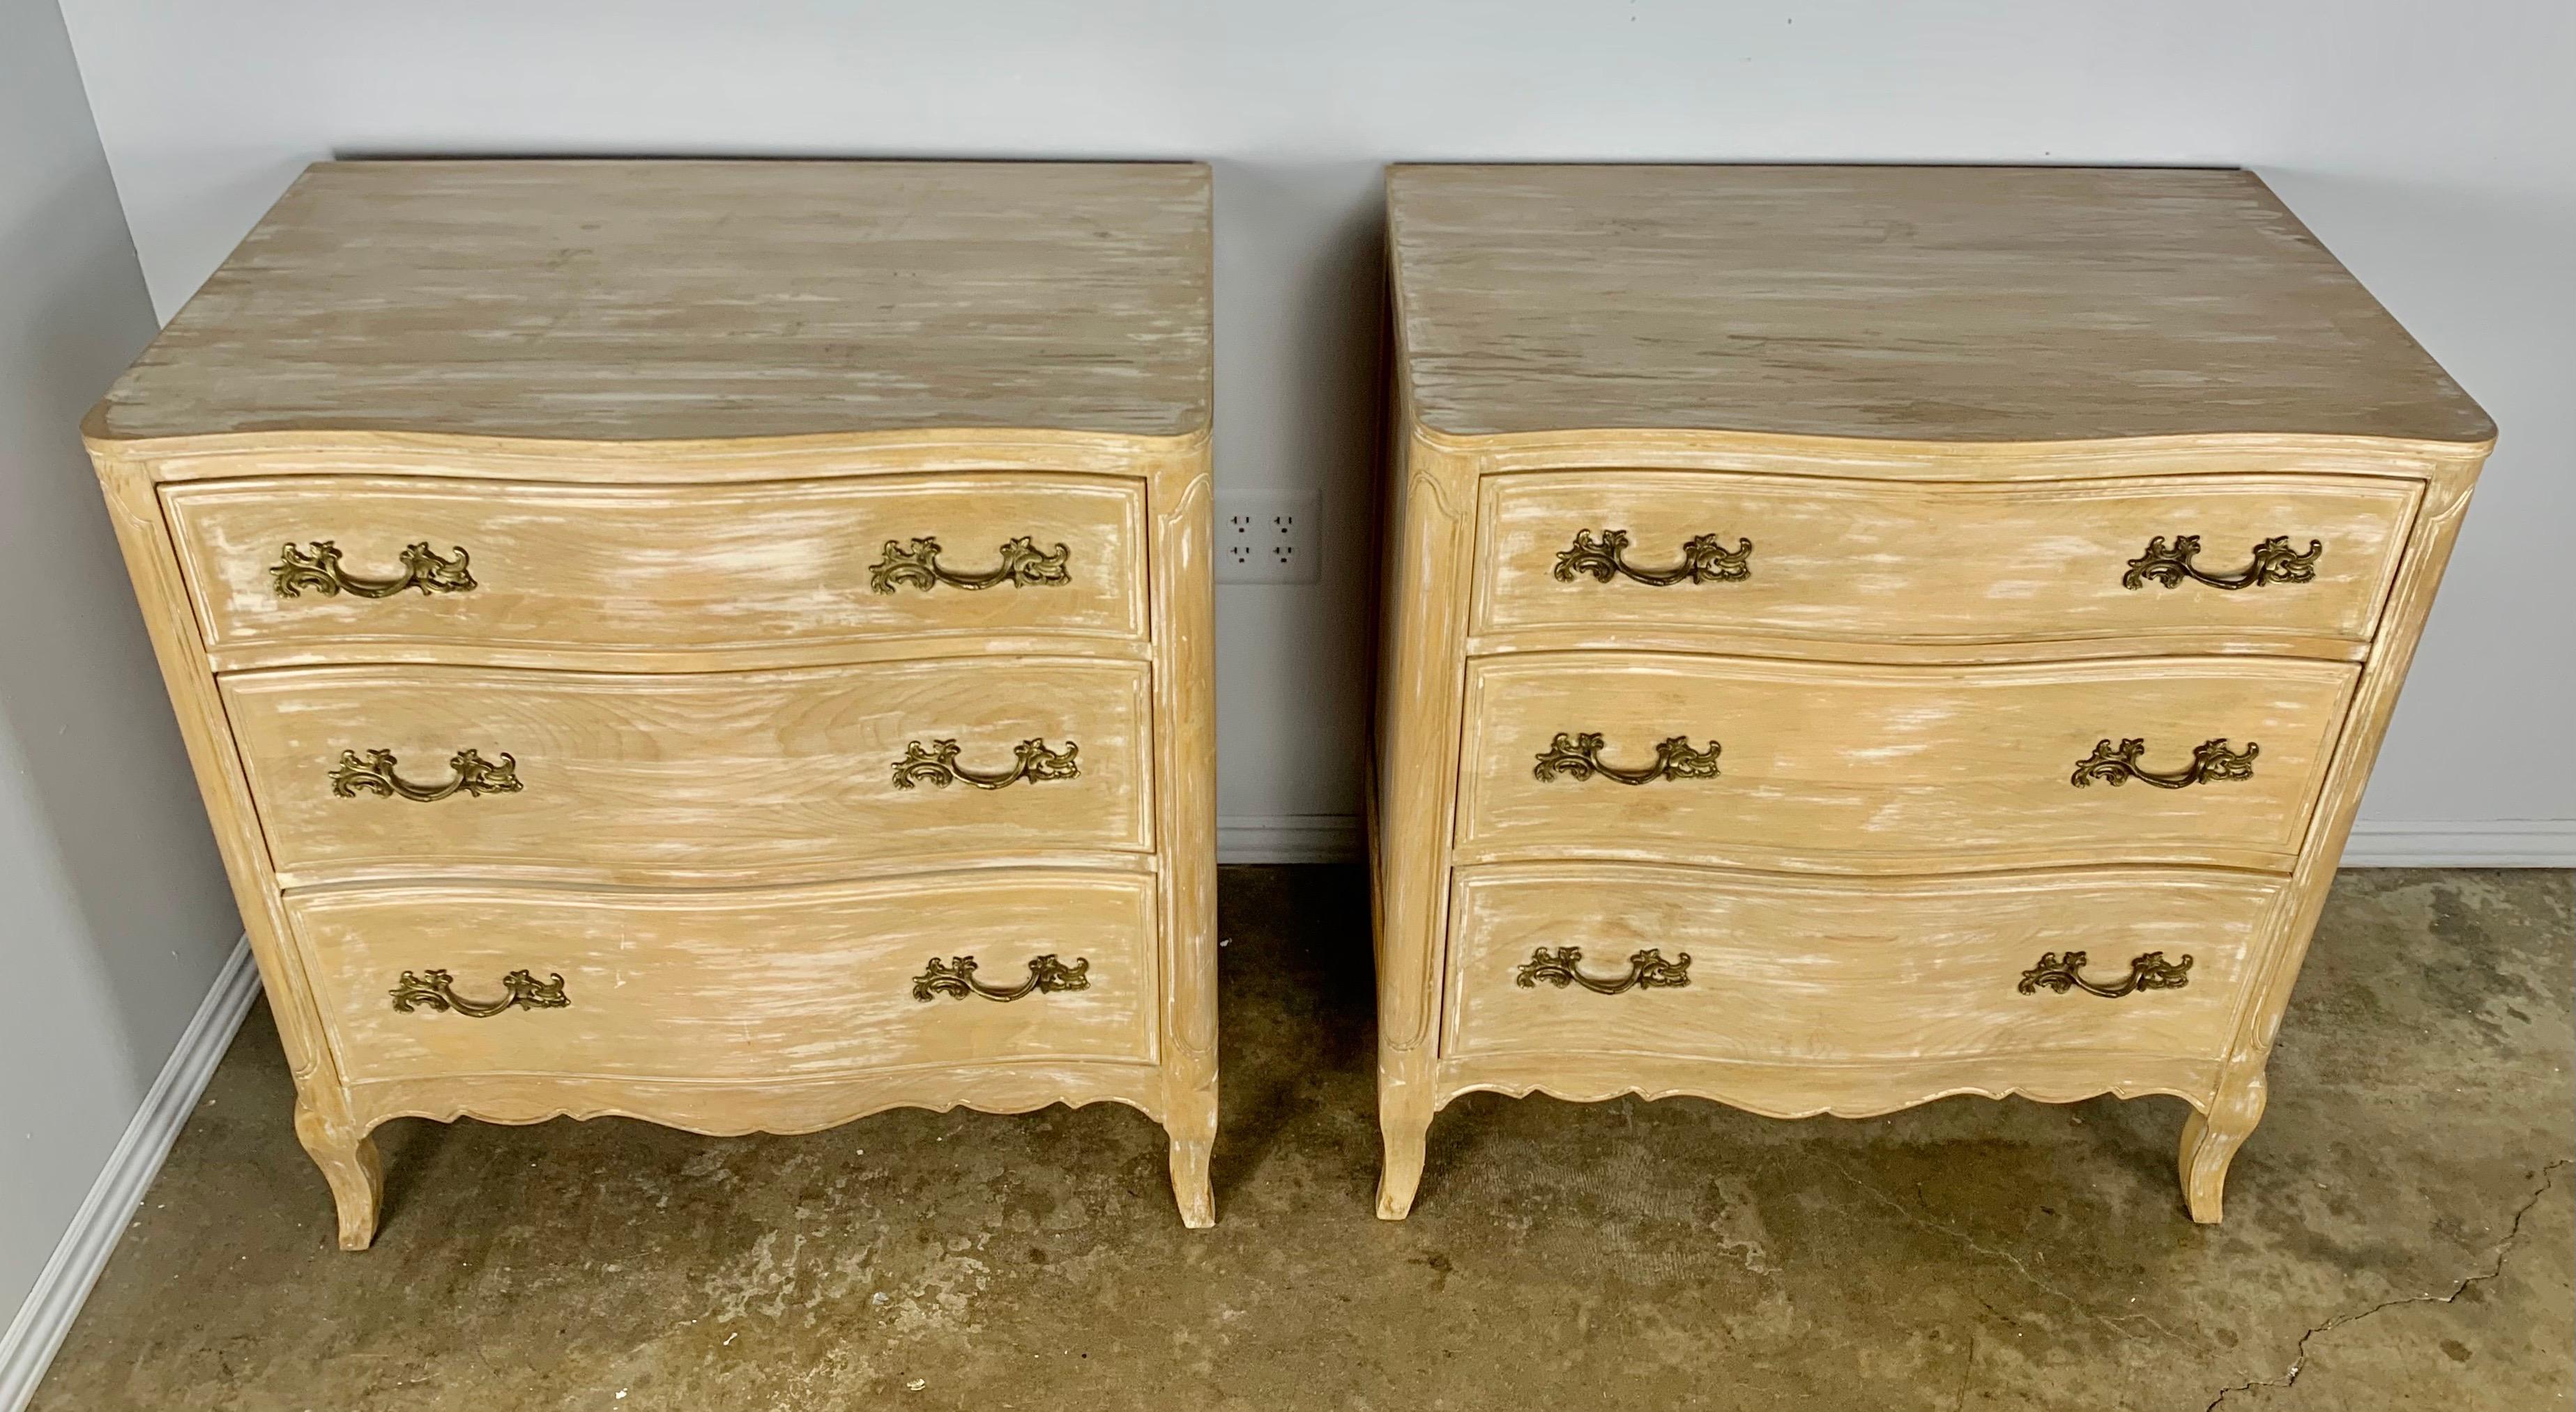 Pair of 3-drawer Louis XV French commodes with cast bronze hardware. The chests stand on four cabriole legs and have a scalloped apron at the bottom. There are remnants of paint left from another time period but they are nicely waxed and have